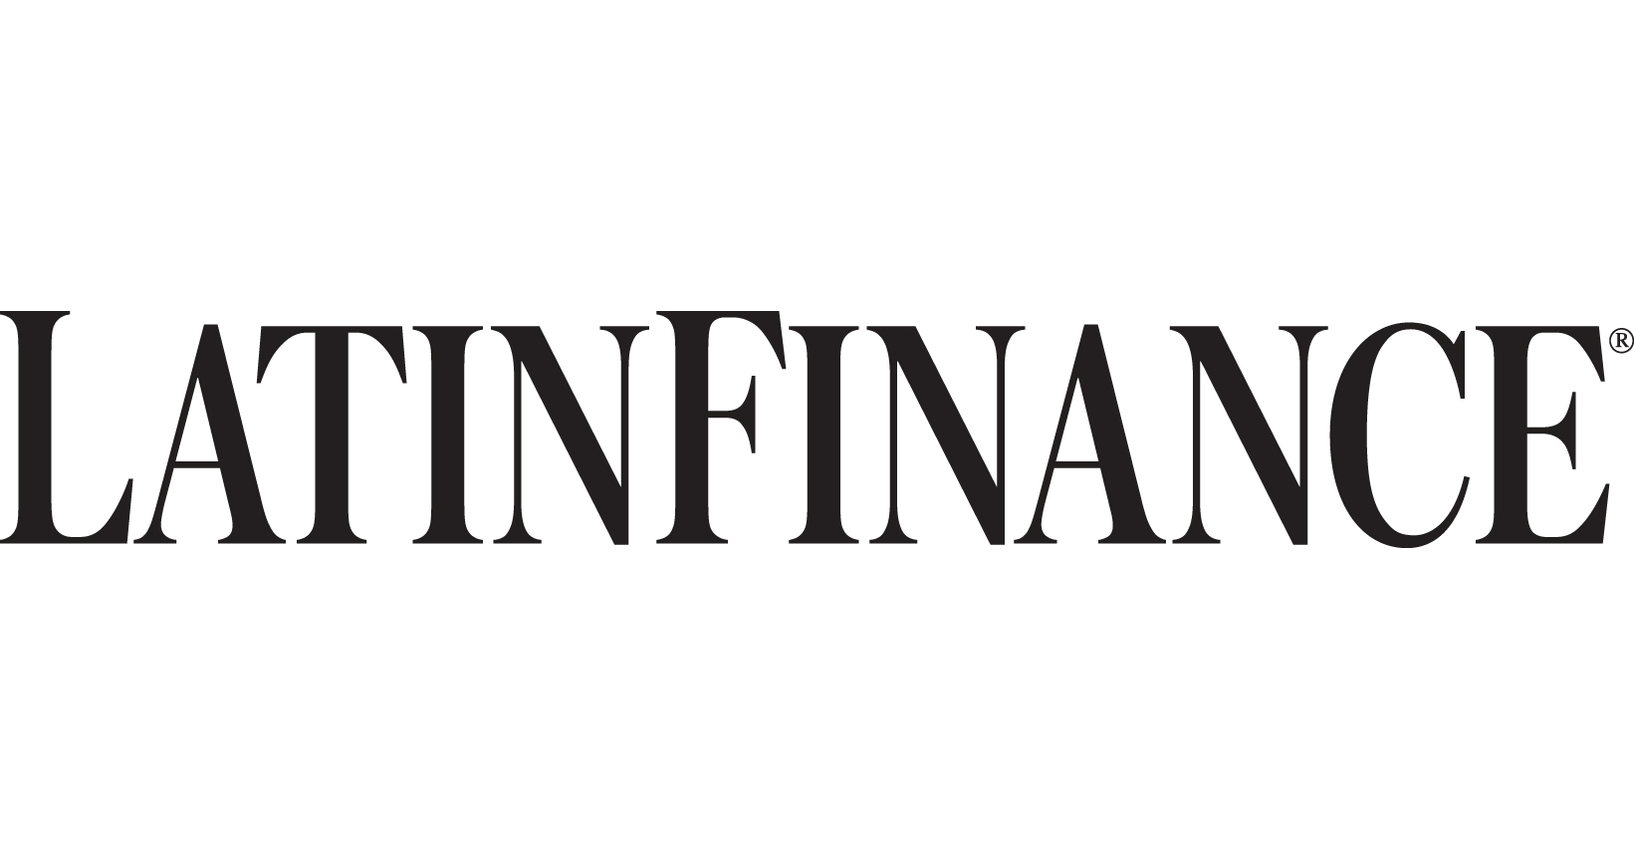 LatinFinance has revealed the winners of its 2022 Project & Infrastructure Finance Awards